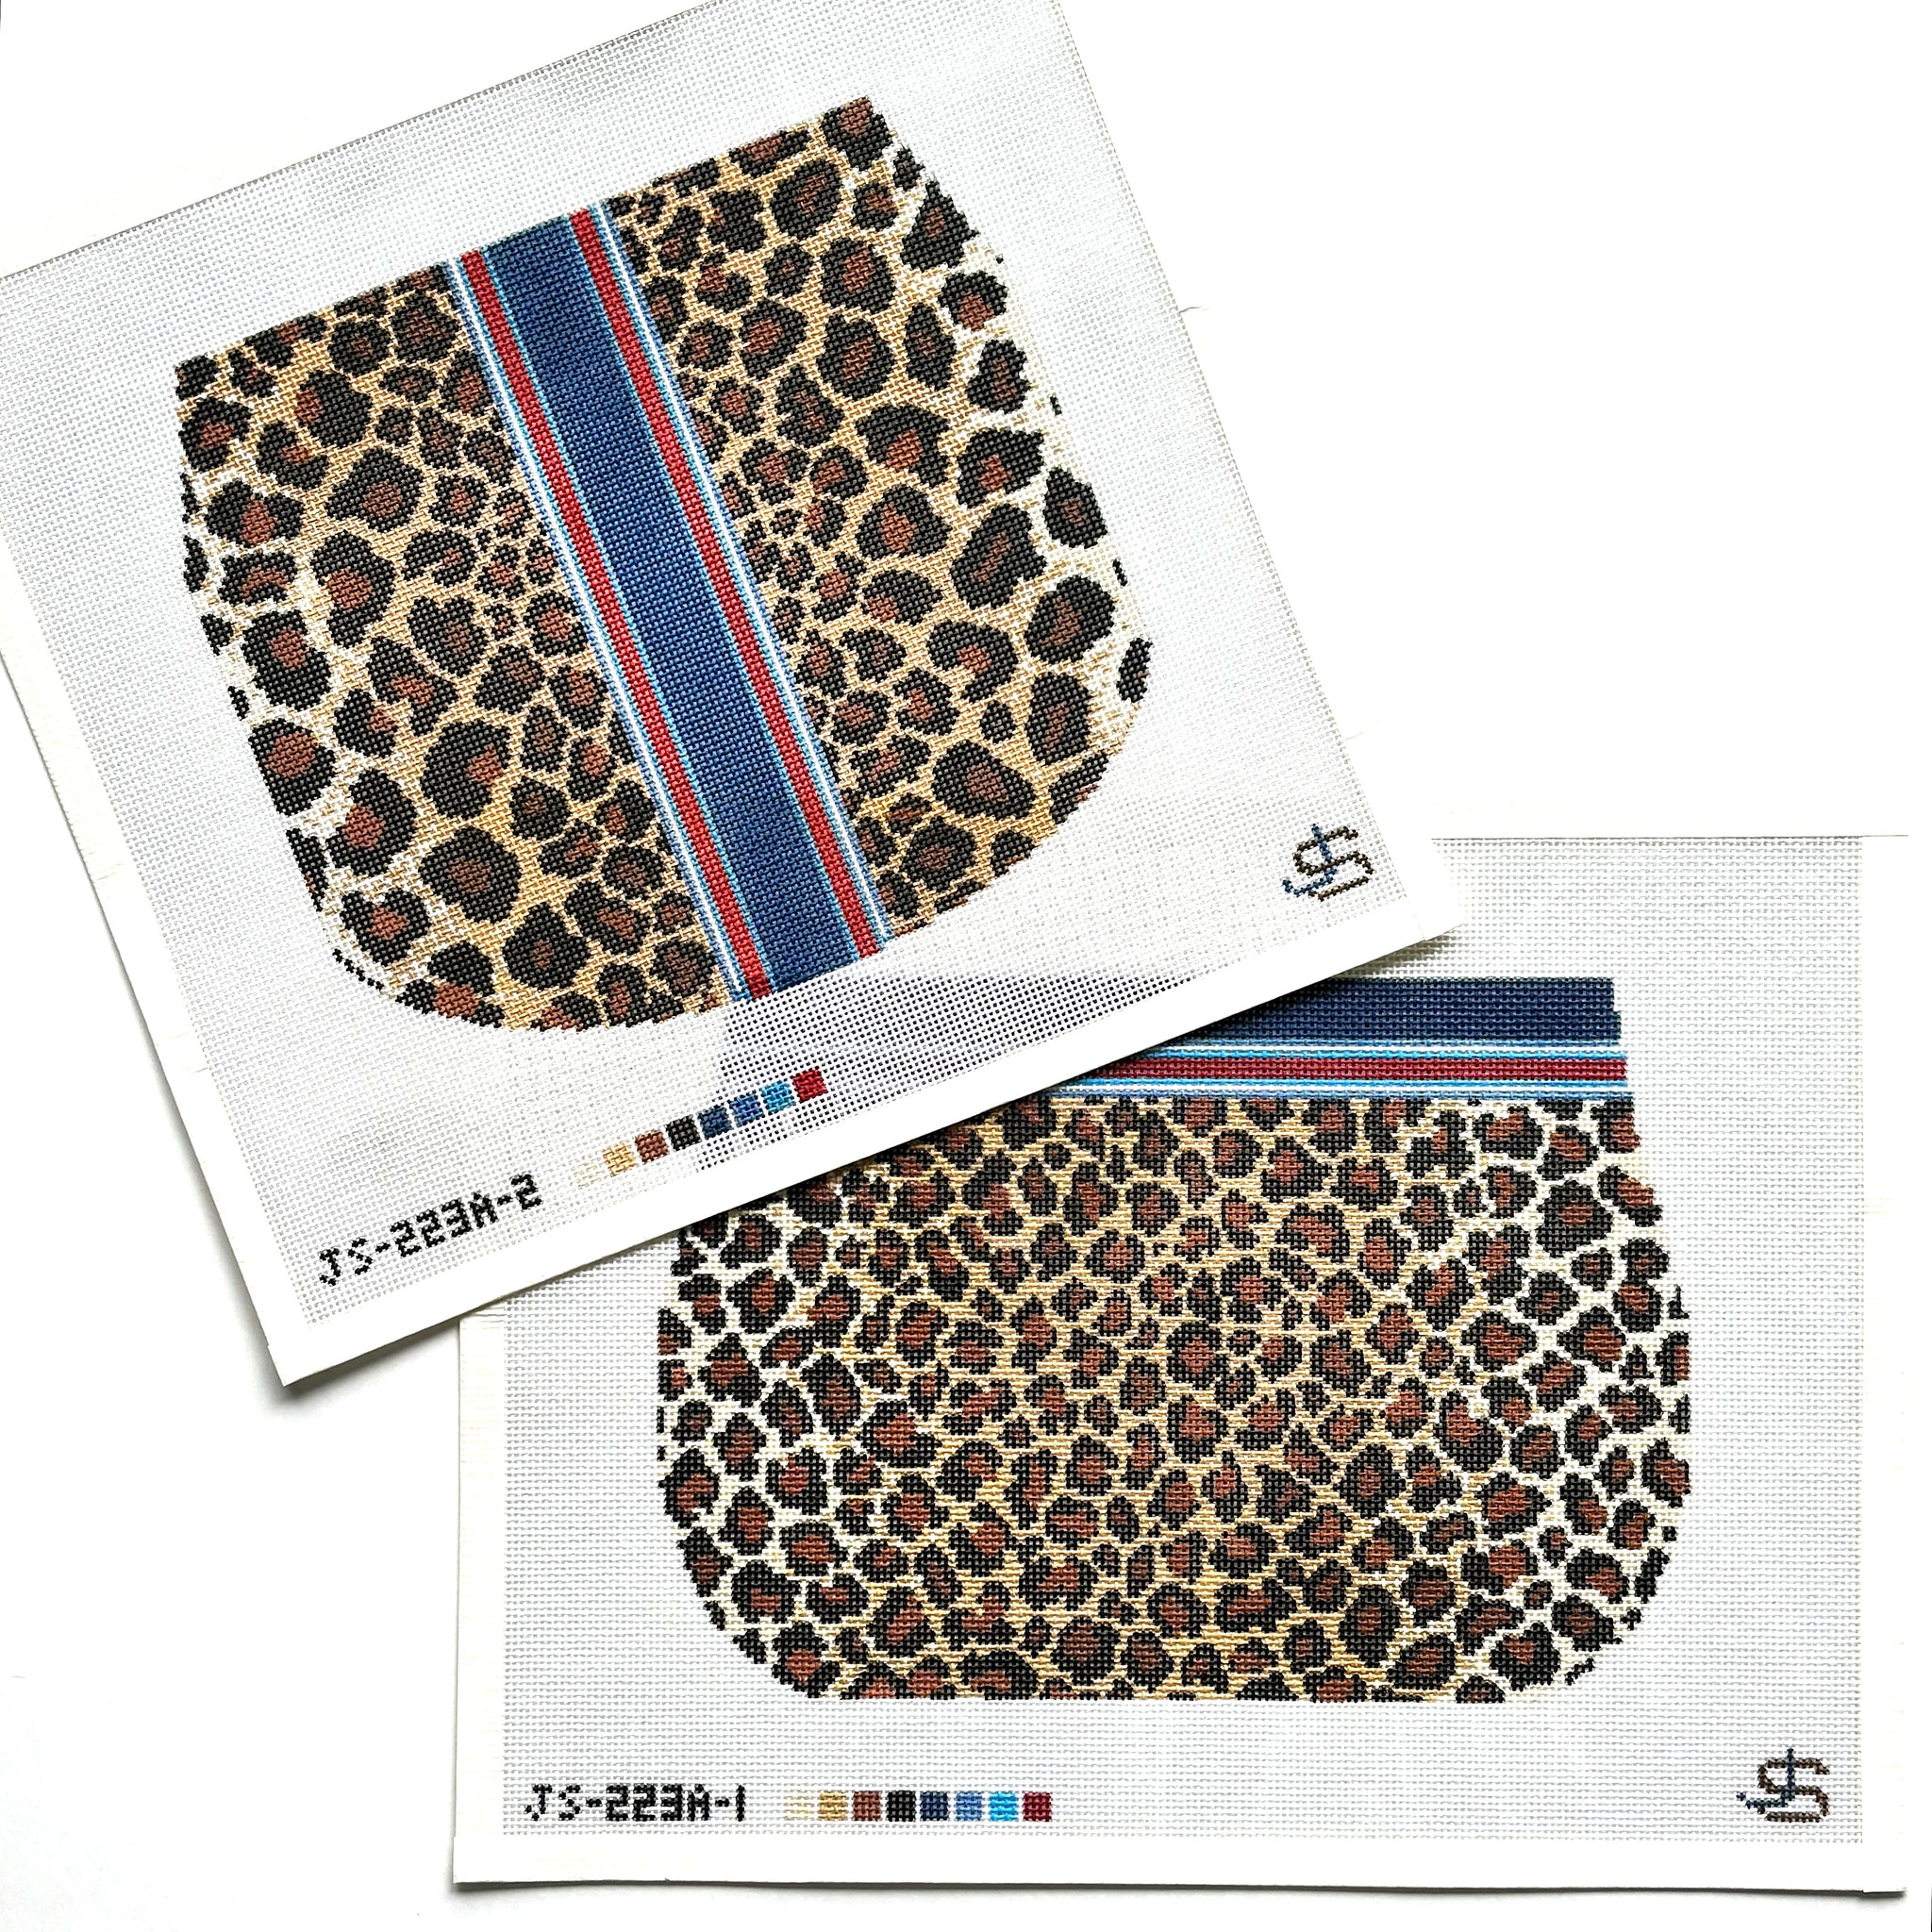 Leopard Handbag Purse and Flap Needlepoint Canvases (2 canvases)